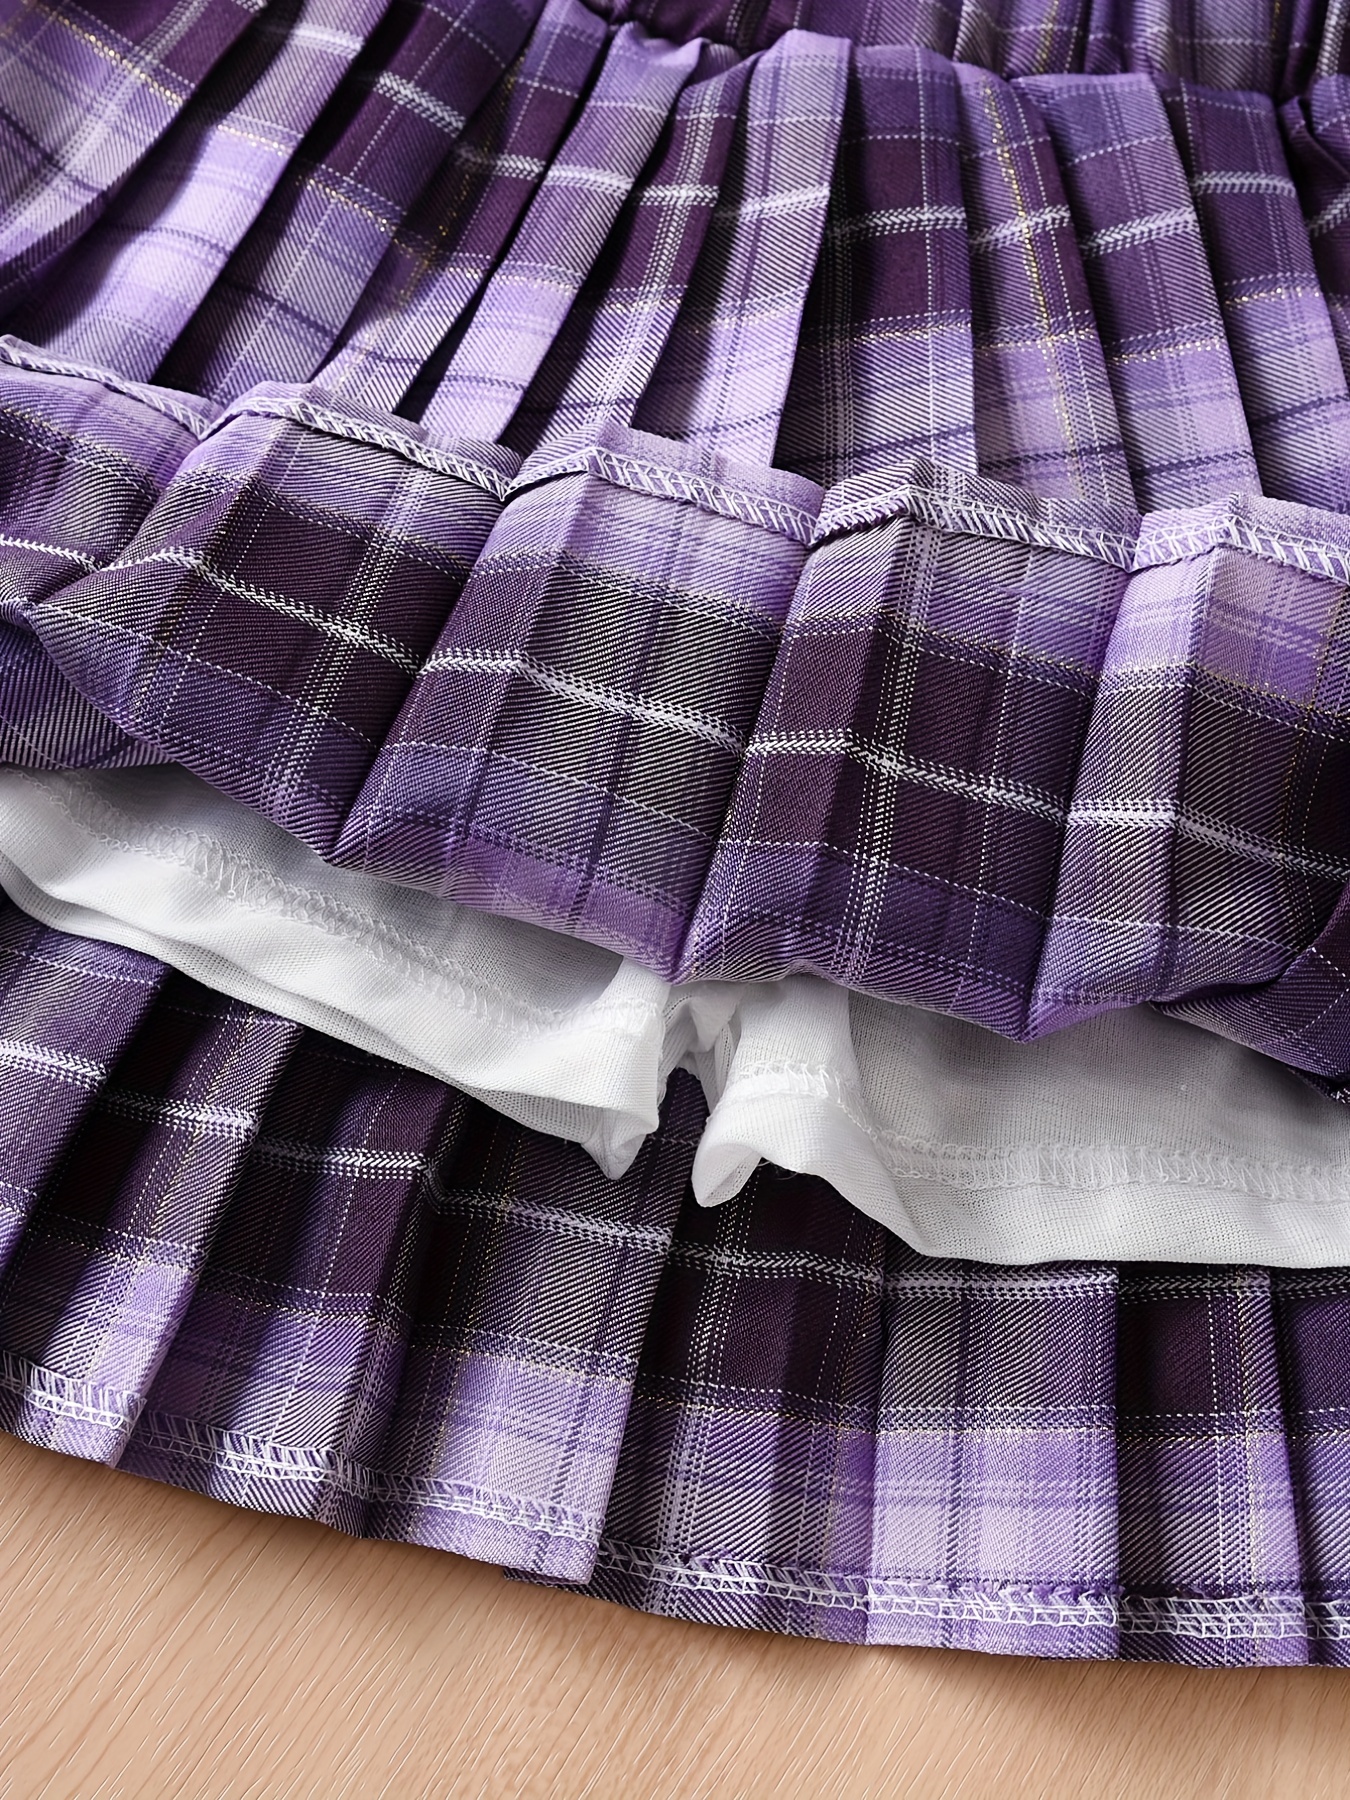 Girls Preppy Summer Twinset Clothing Short Sleeve T Shirt And Plaid Skirt  School Costume For Children Aged 6 12 Years W230210 From Make03, $16.27